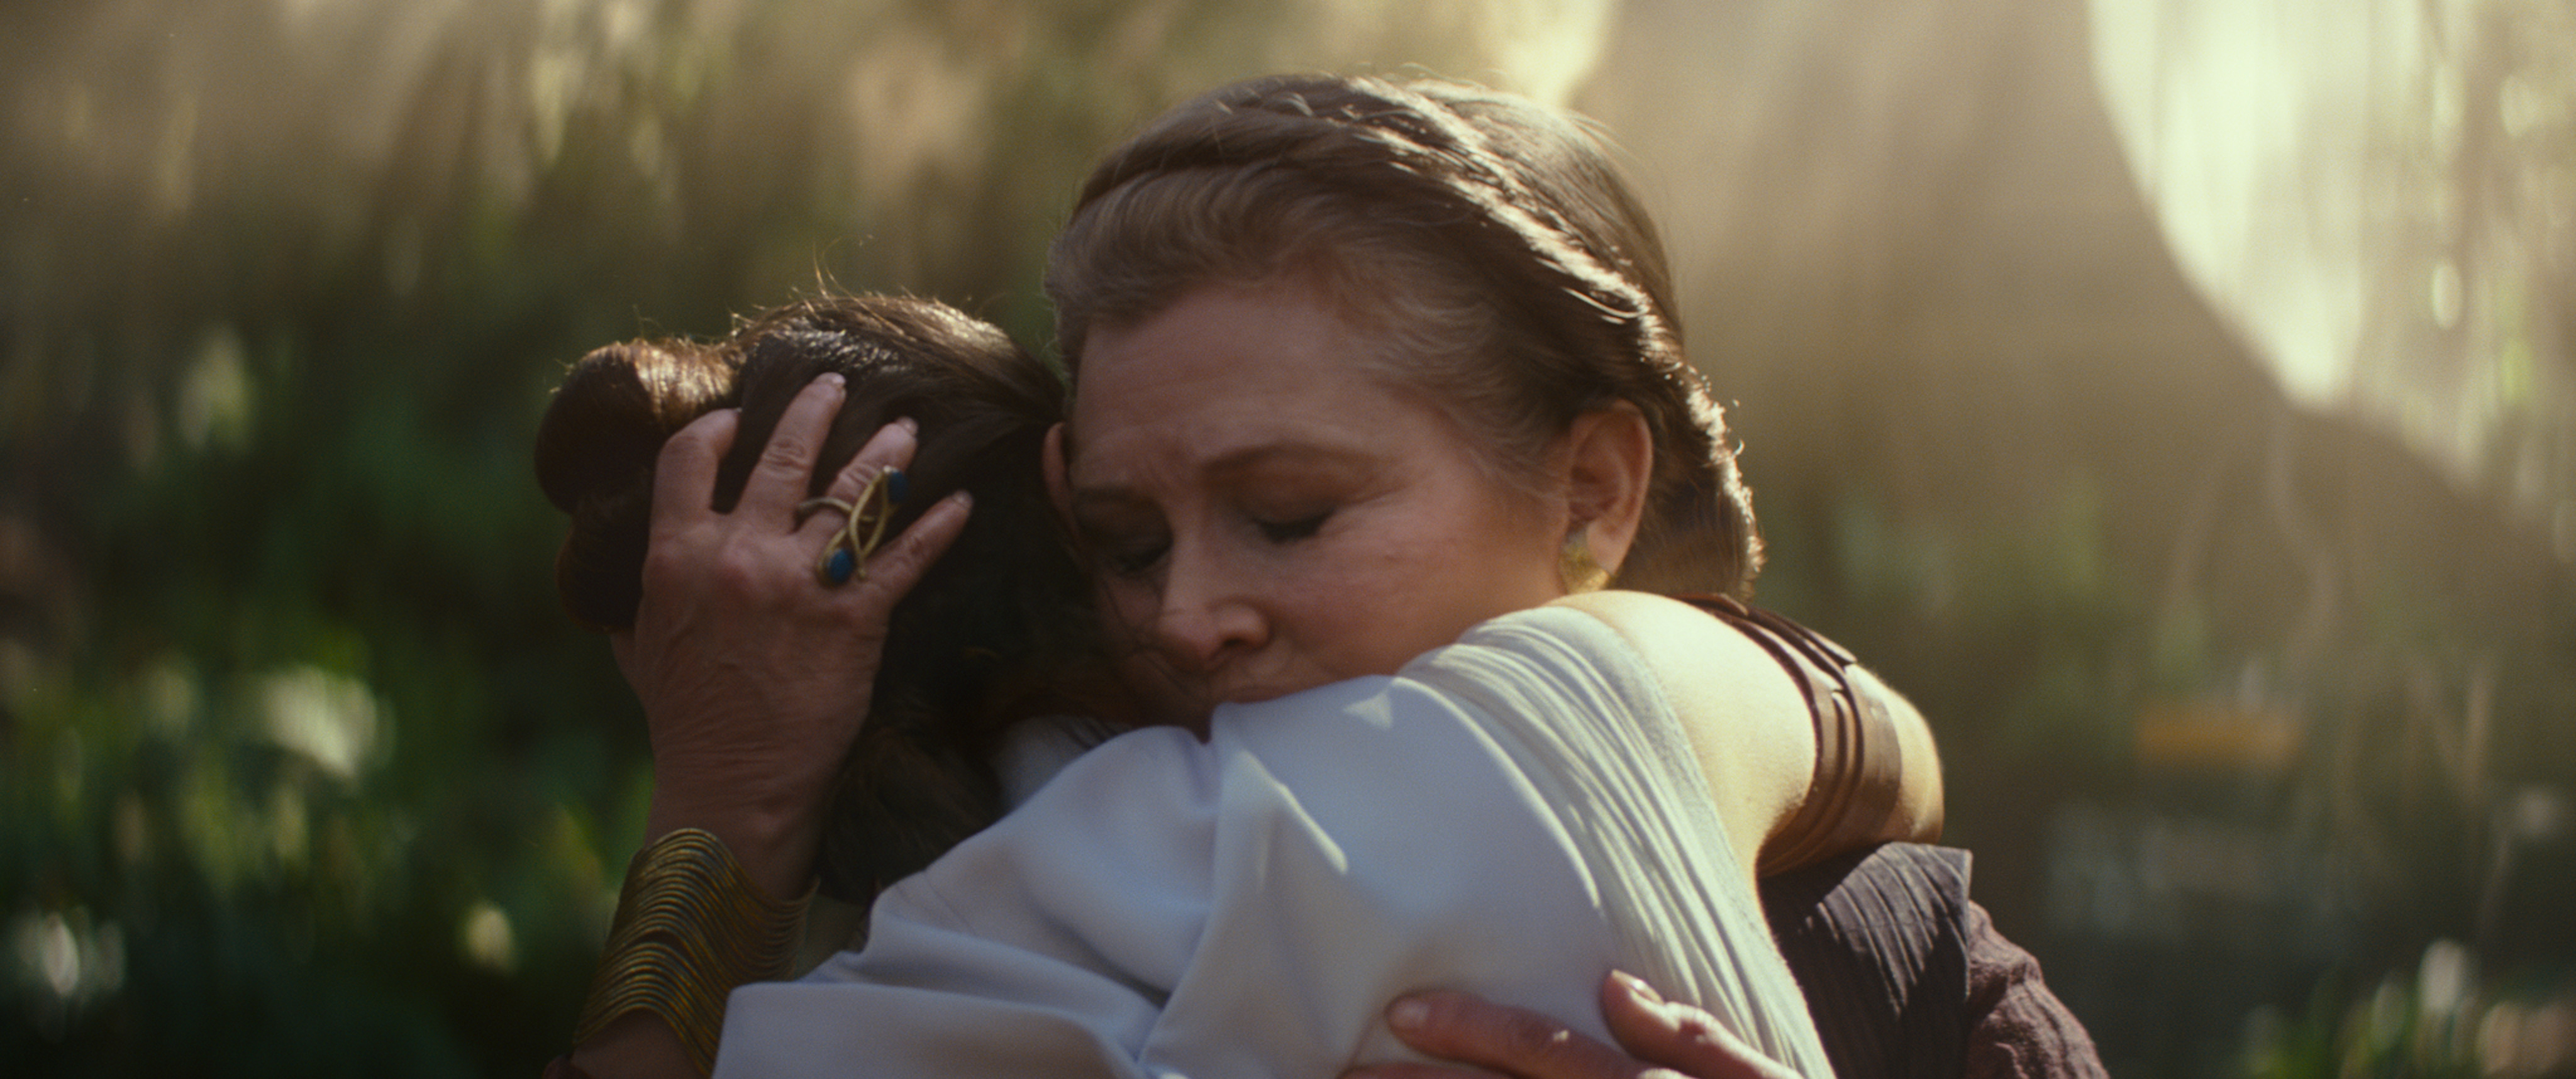 General Leia Organa (Carrie Fisher) and Rey (Daisy Ridley) in STAR WARS: THE RISE OF SKYWALKER (Lucasfilm Ltd.—Lucasfilm Ltd.)